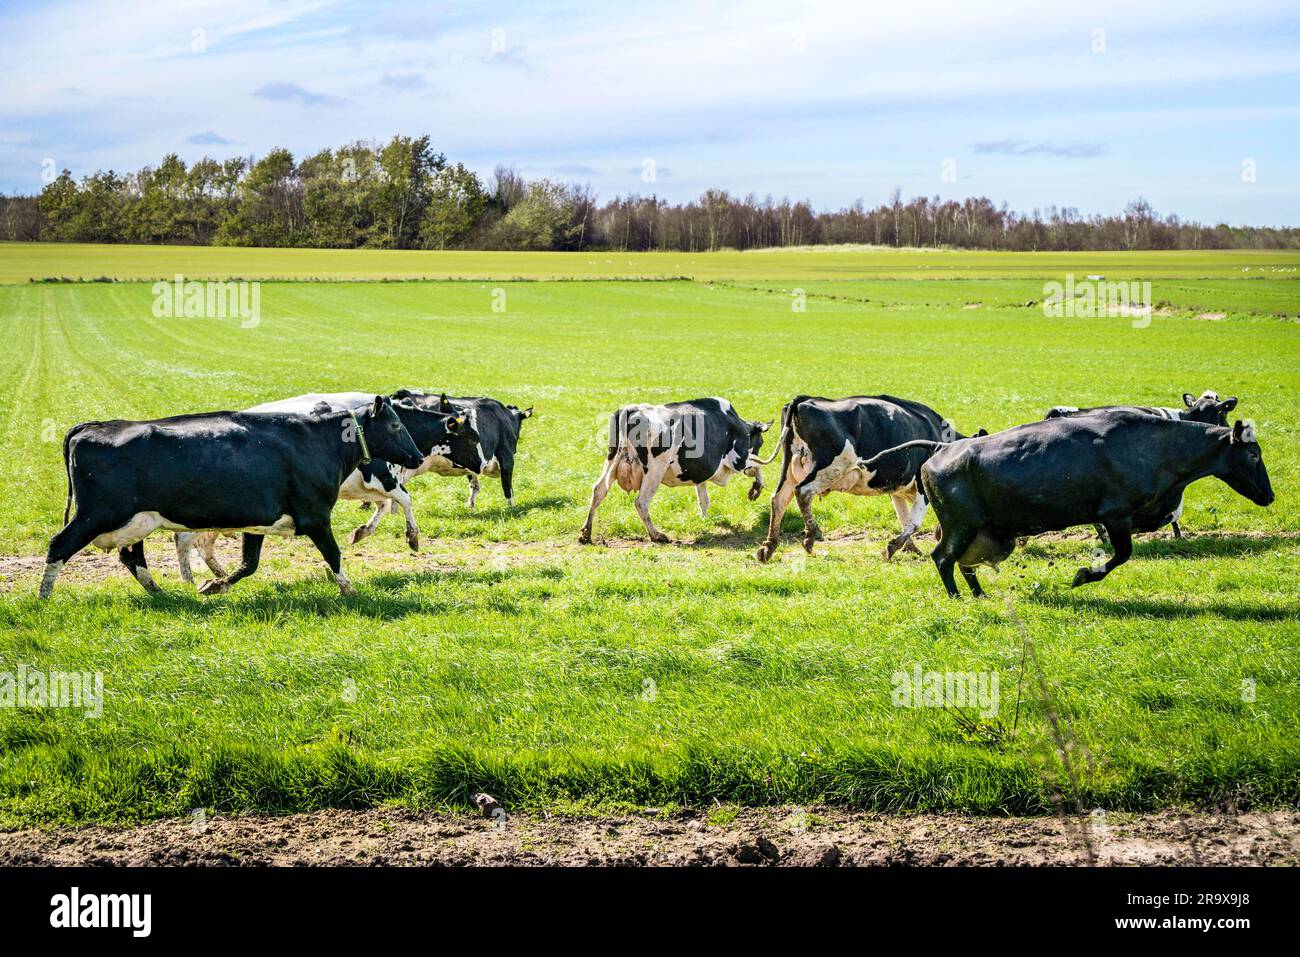 Cattle on grass for the first time in the spring running and jumping in excitement Stock Photo